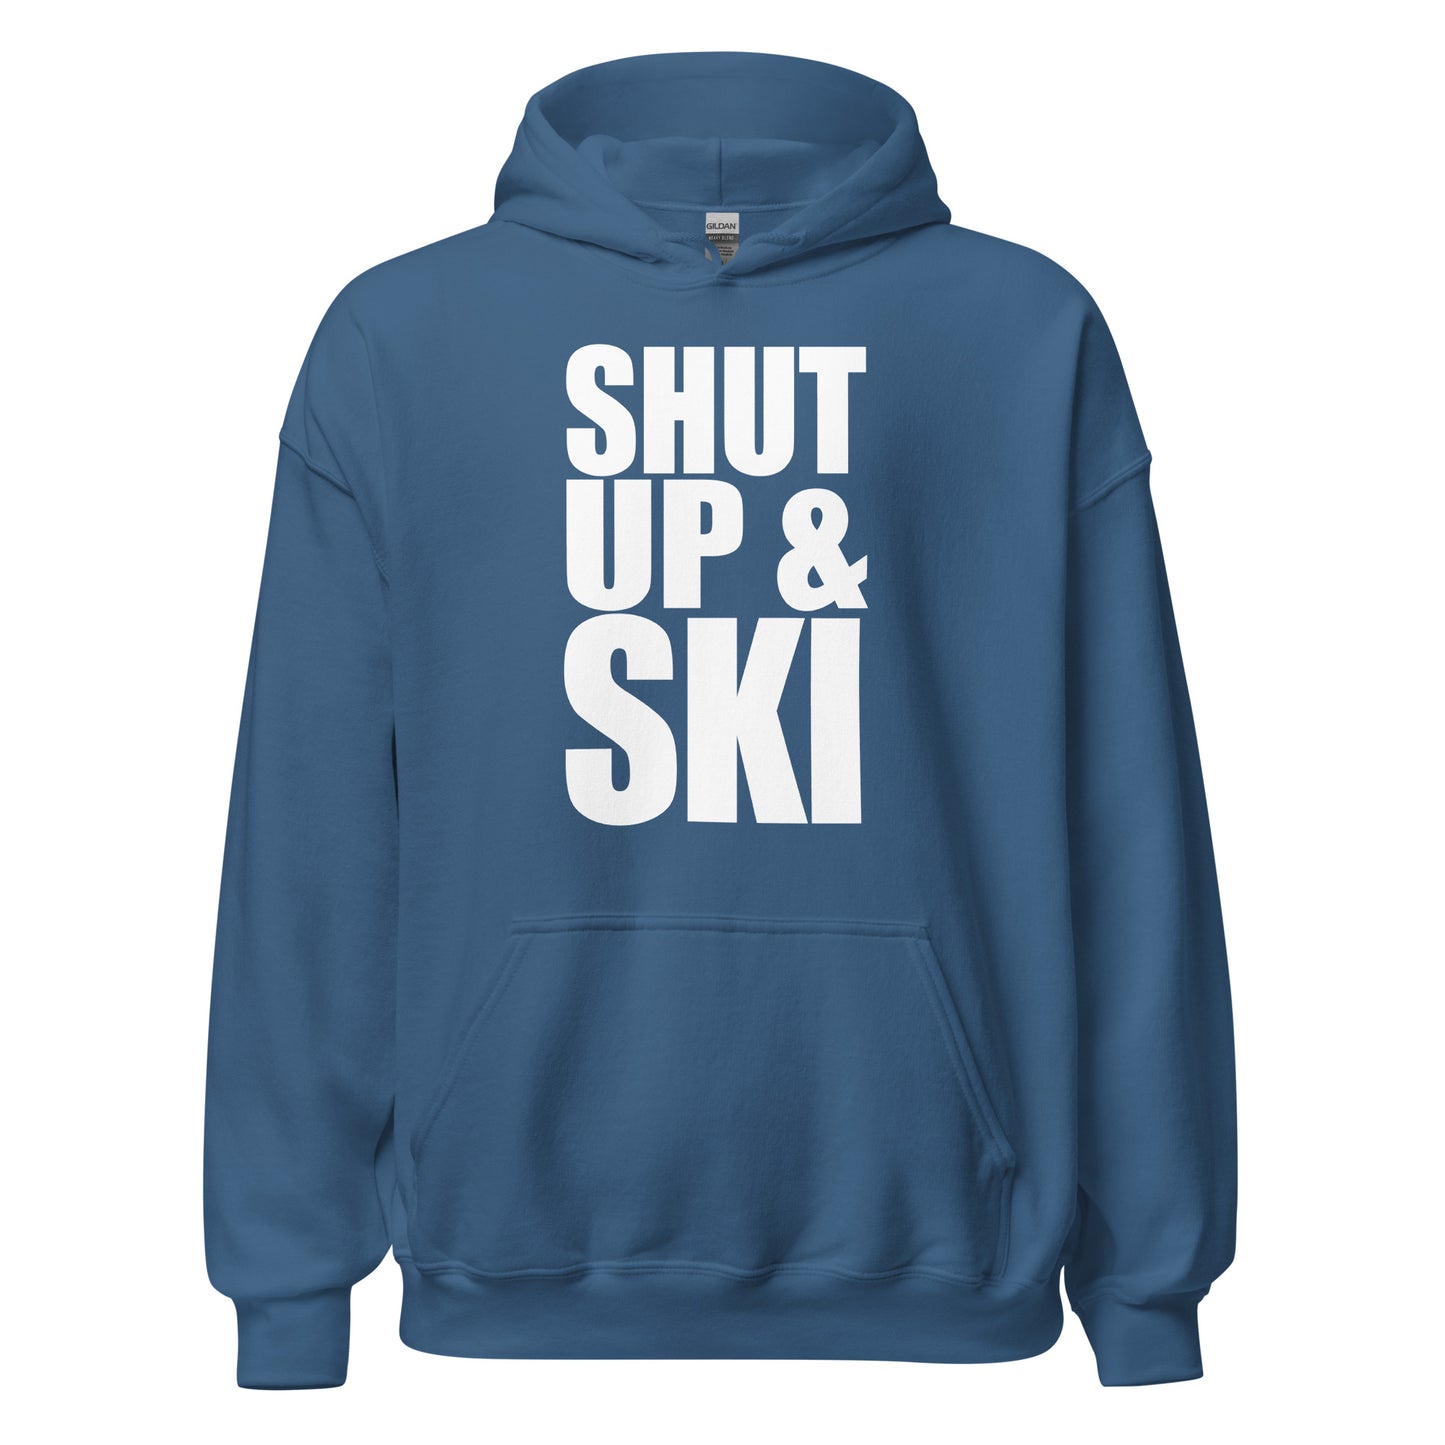 Shut up and ski printed on hoodie by Whistler Shirts